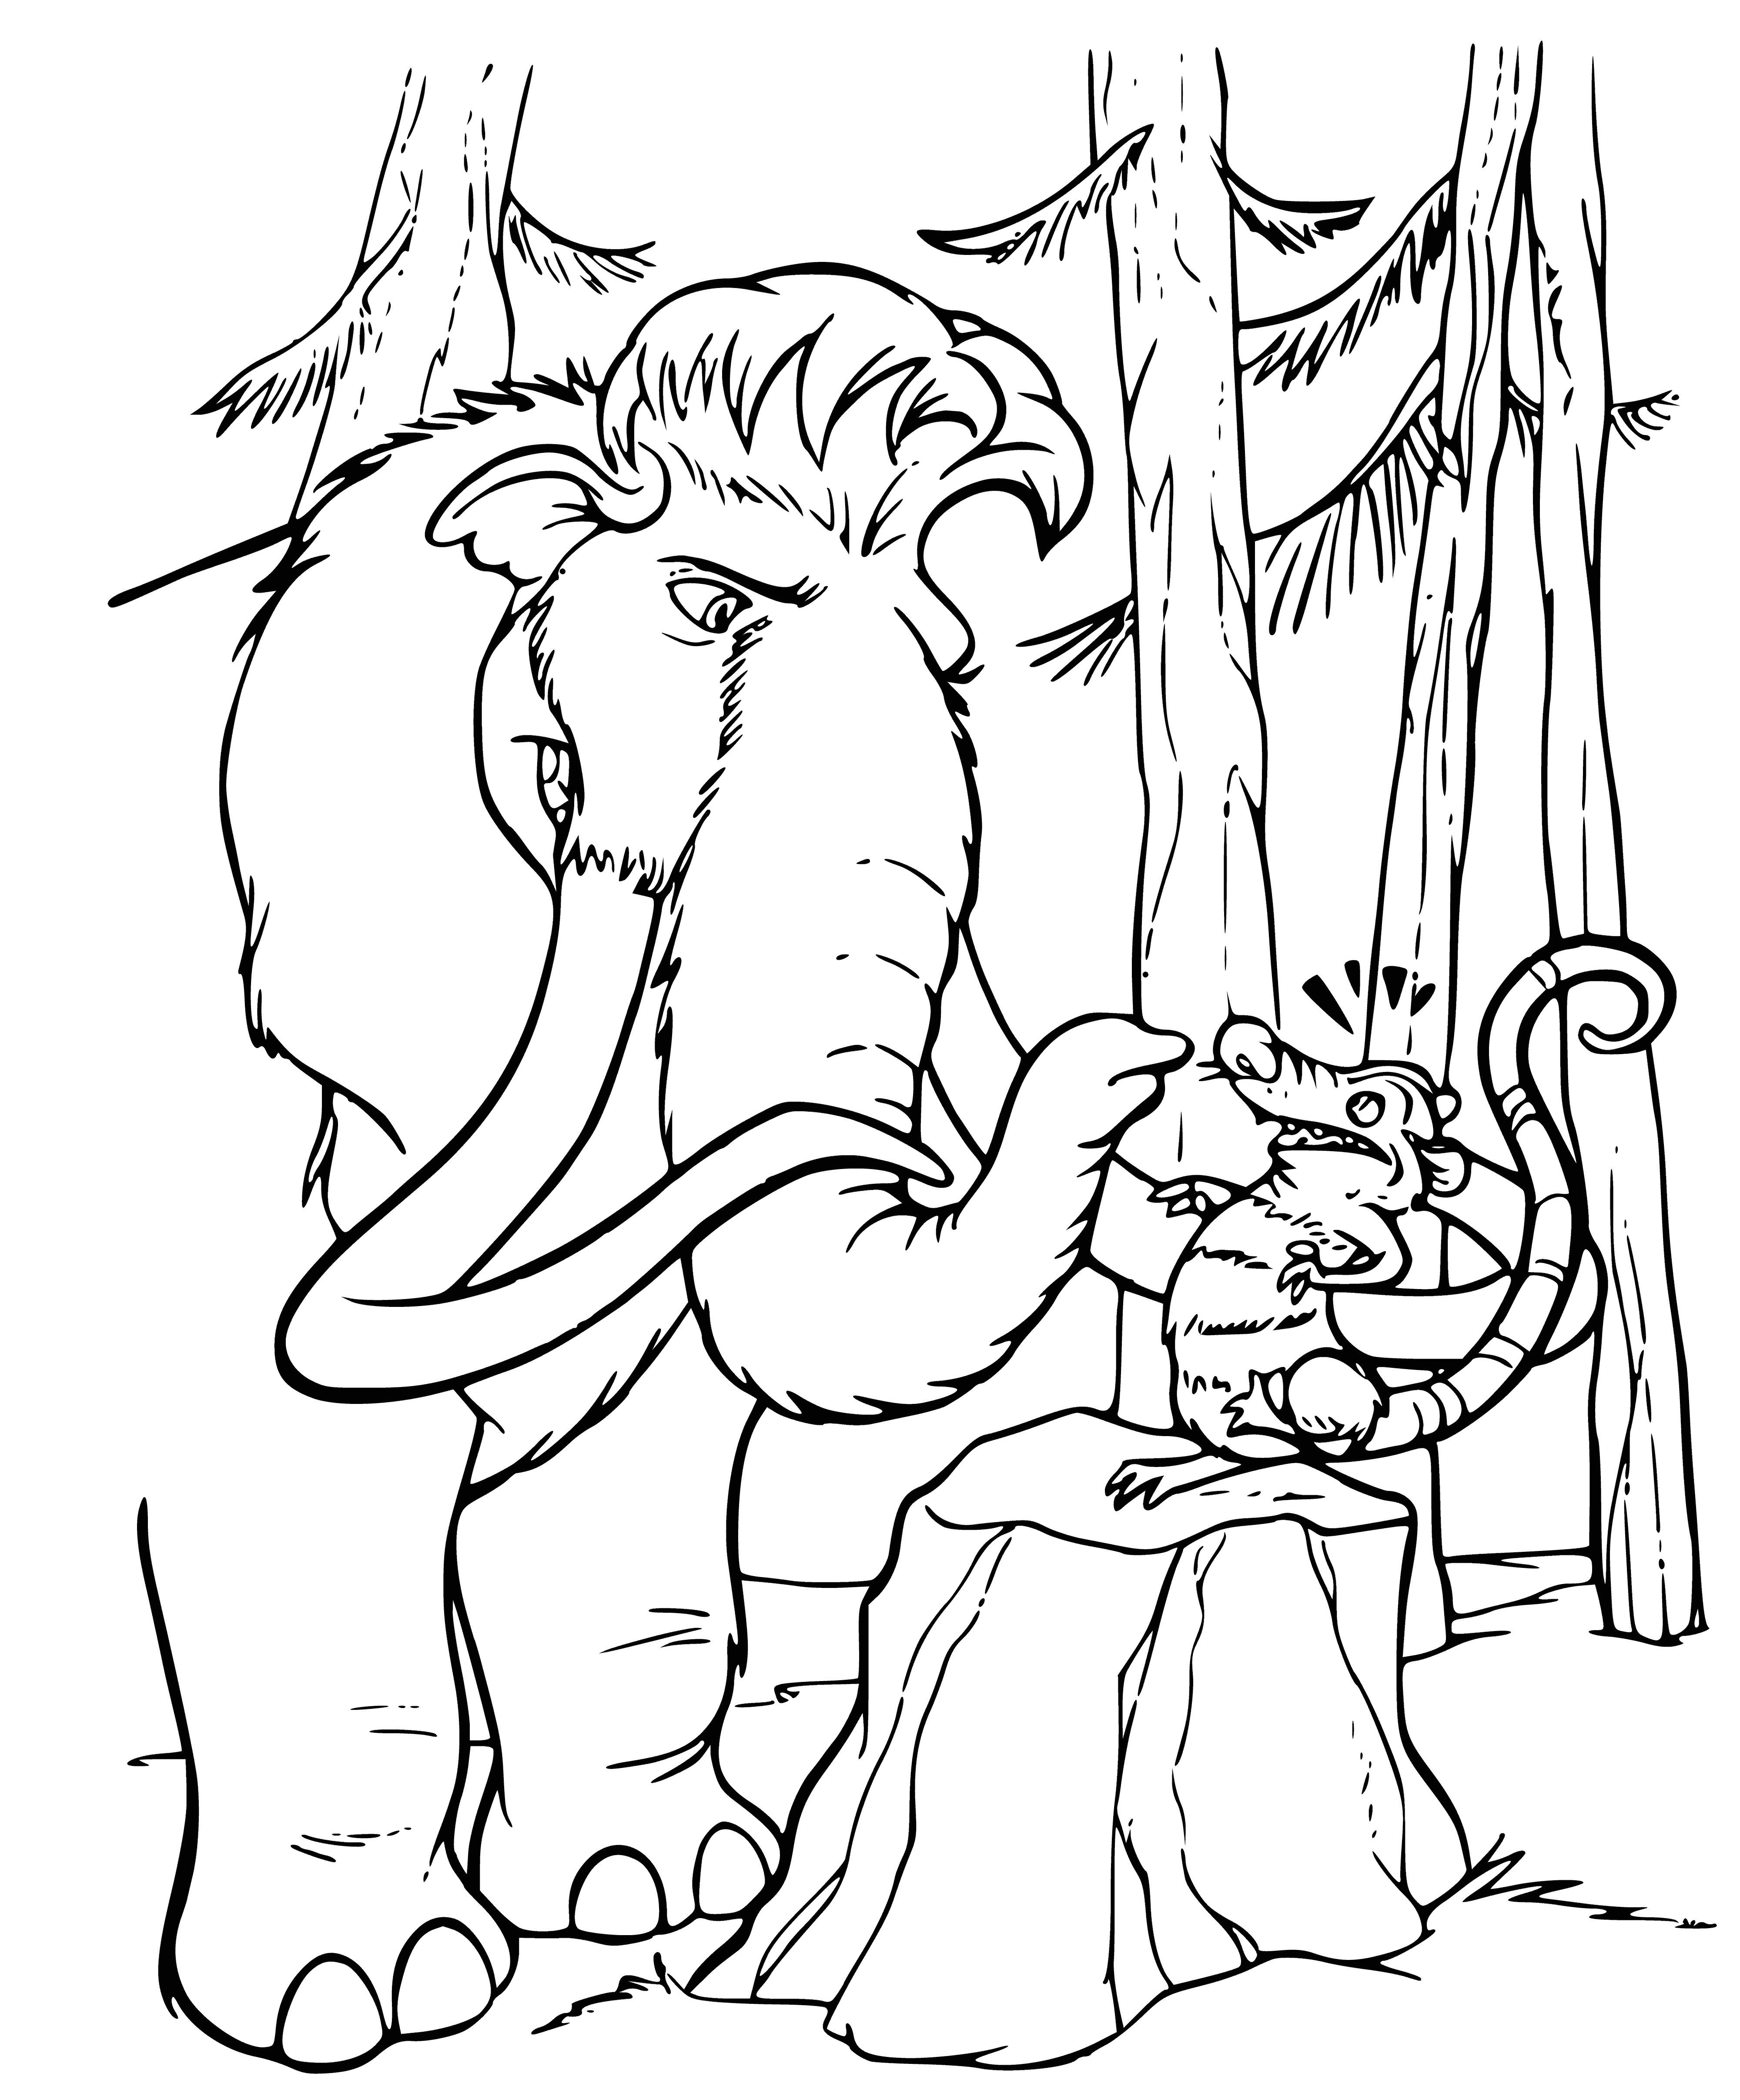 Manny and the possum coloring page